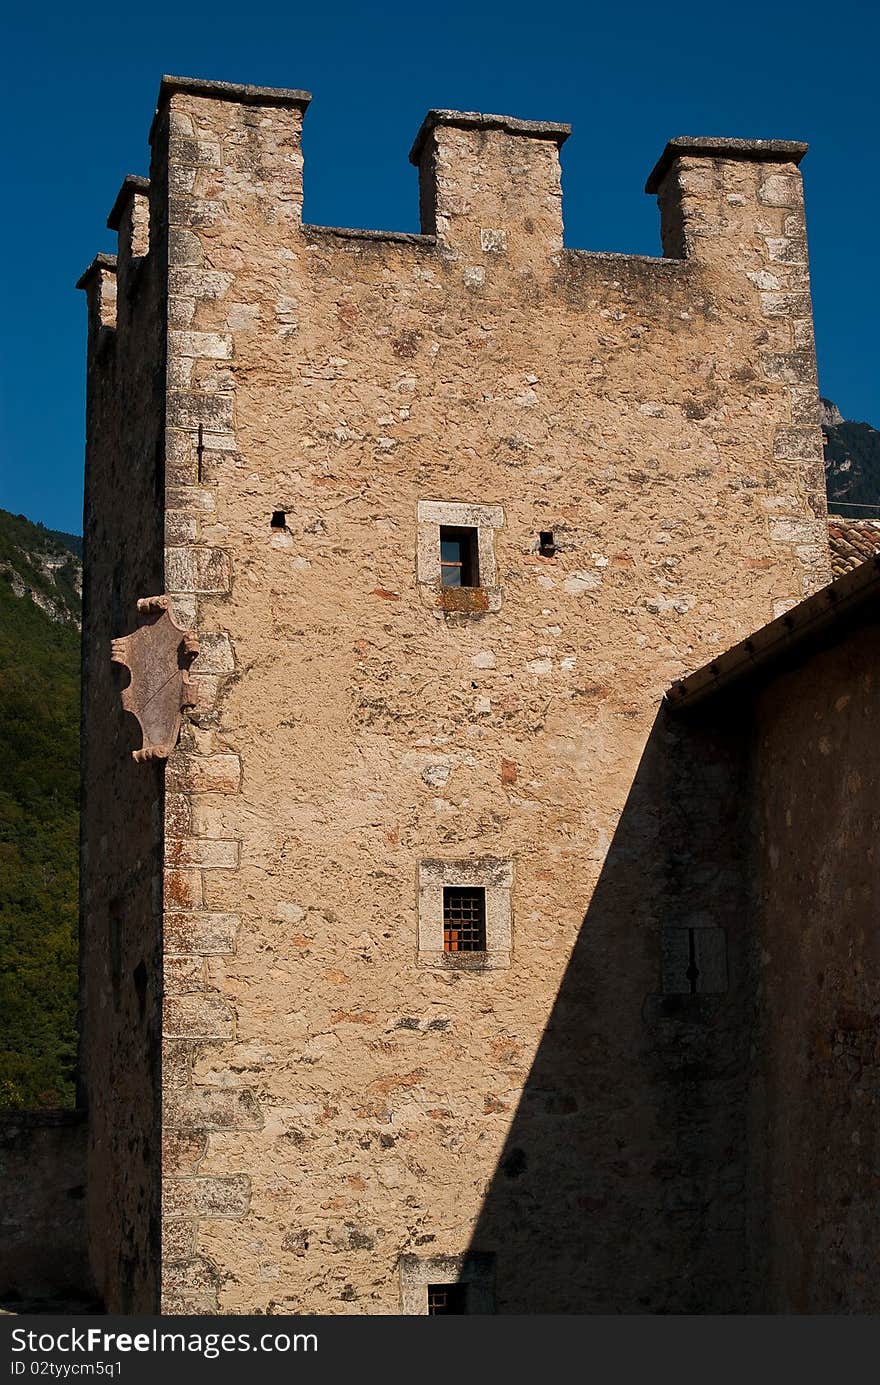 A tower of a medieval castle. castle Thun in Trentino. A tower of a medieval castle. castle Thun in Trentino